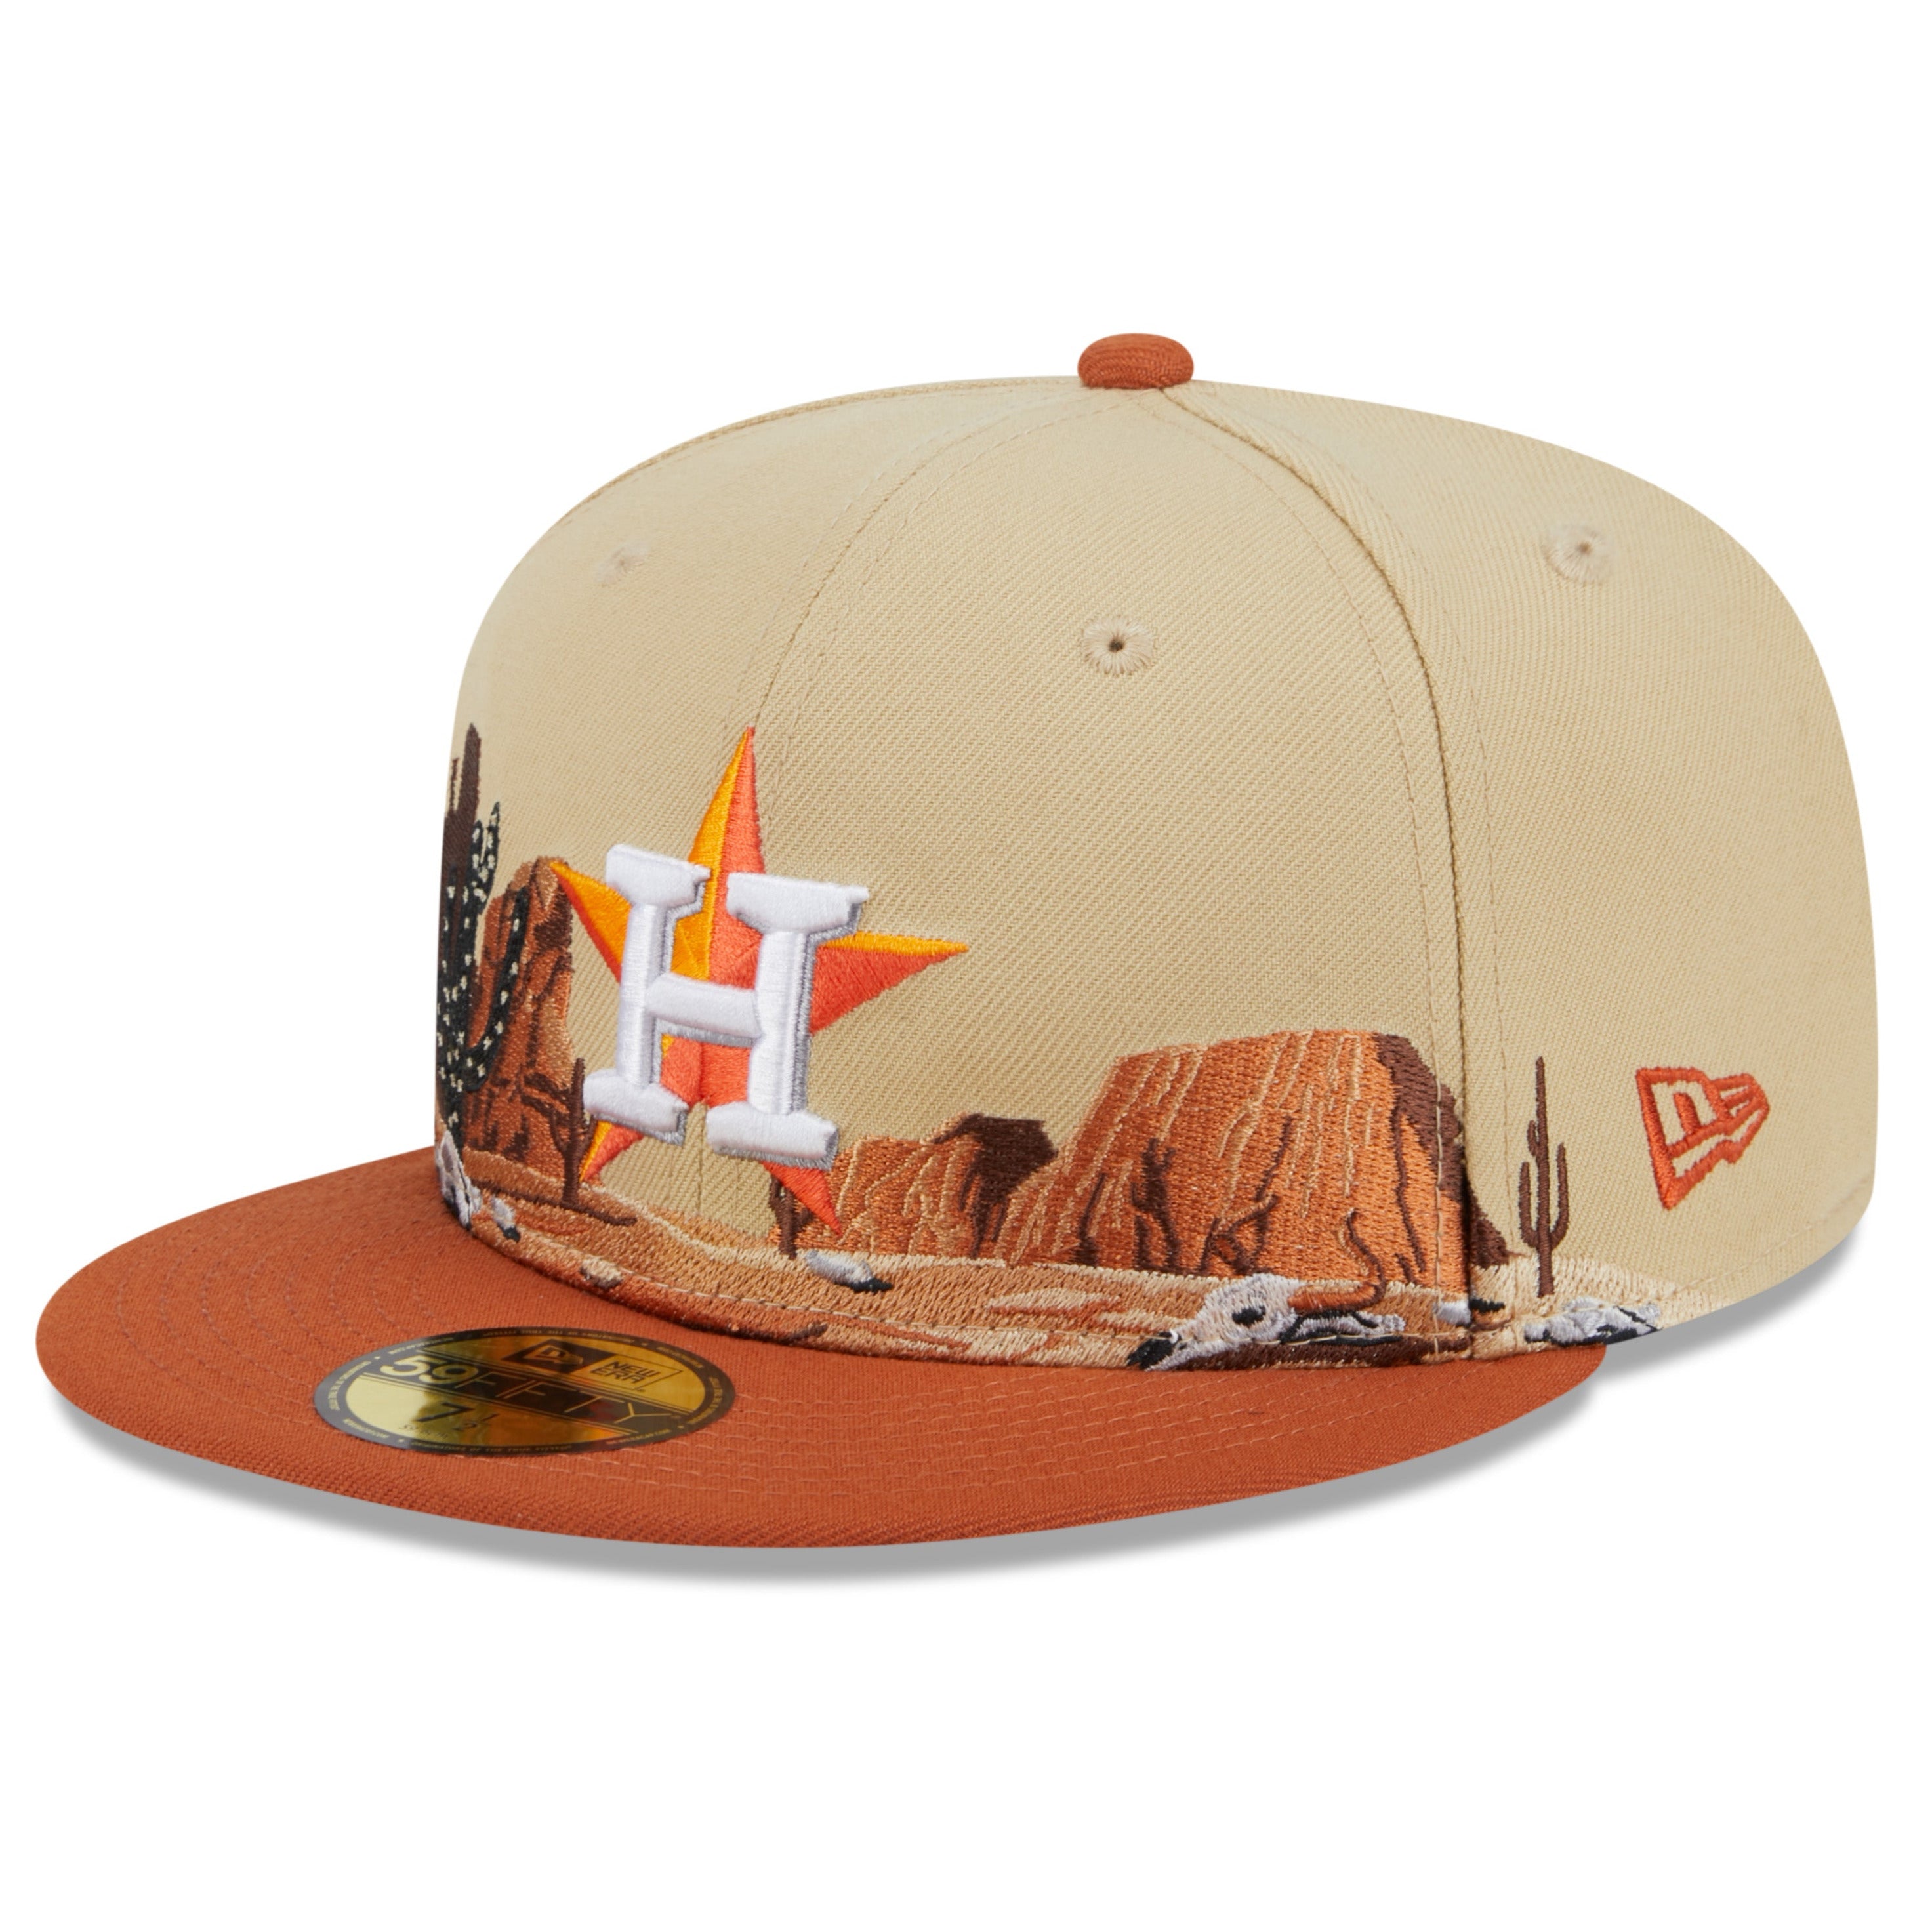 NEW ERA 59FIFTY MLB HOUSTON ASTROS TEAM LANDSCAPE TWO TONE / GREY UV FITTED CAP